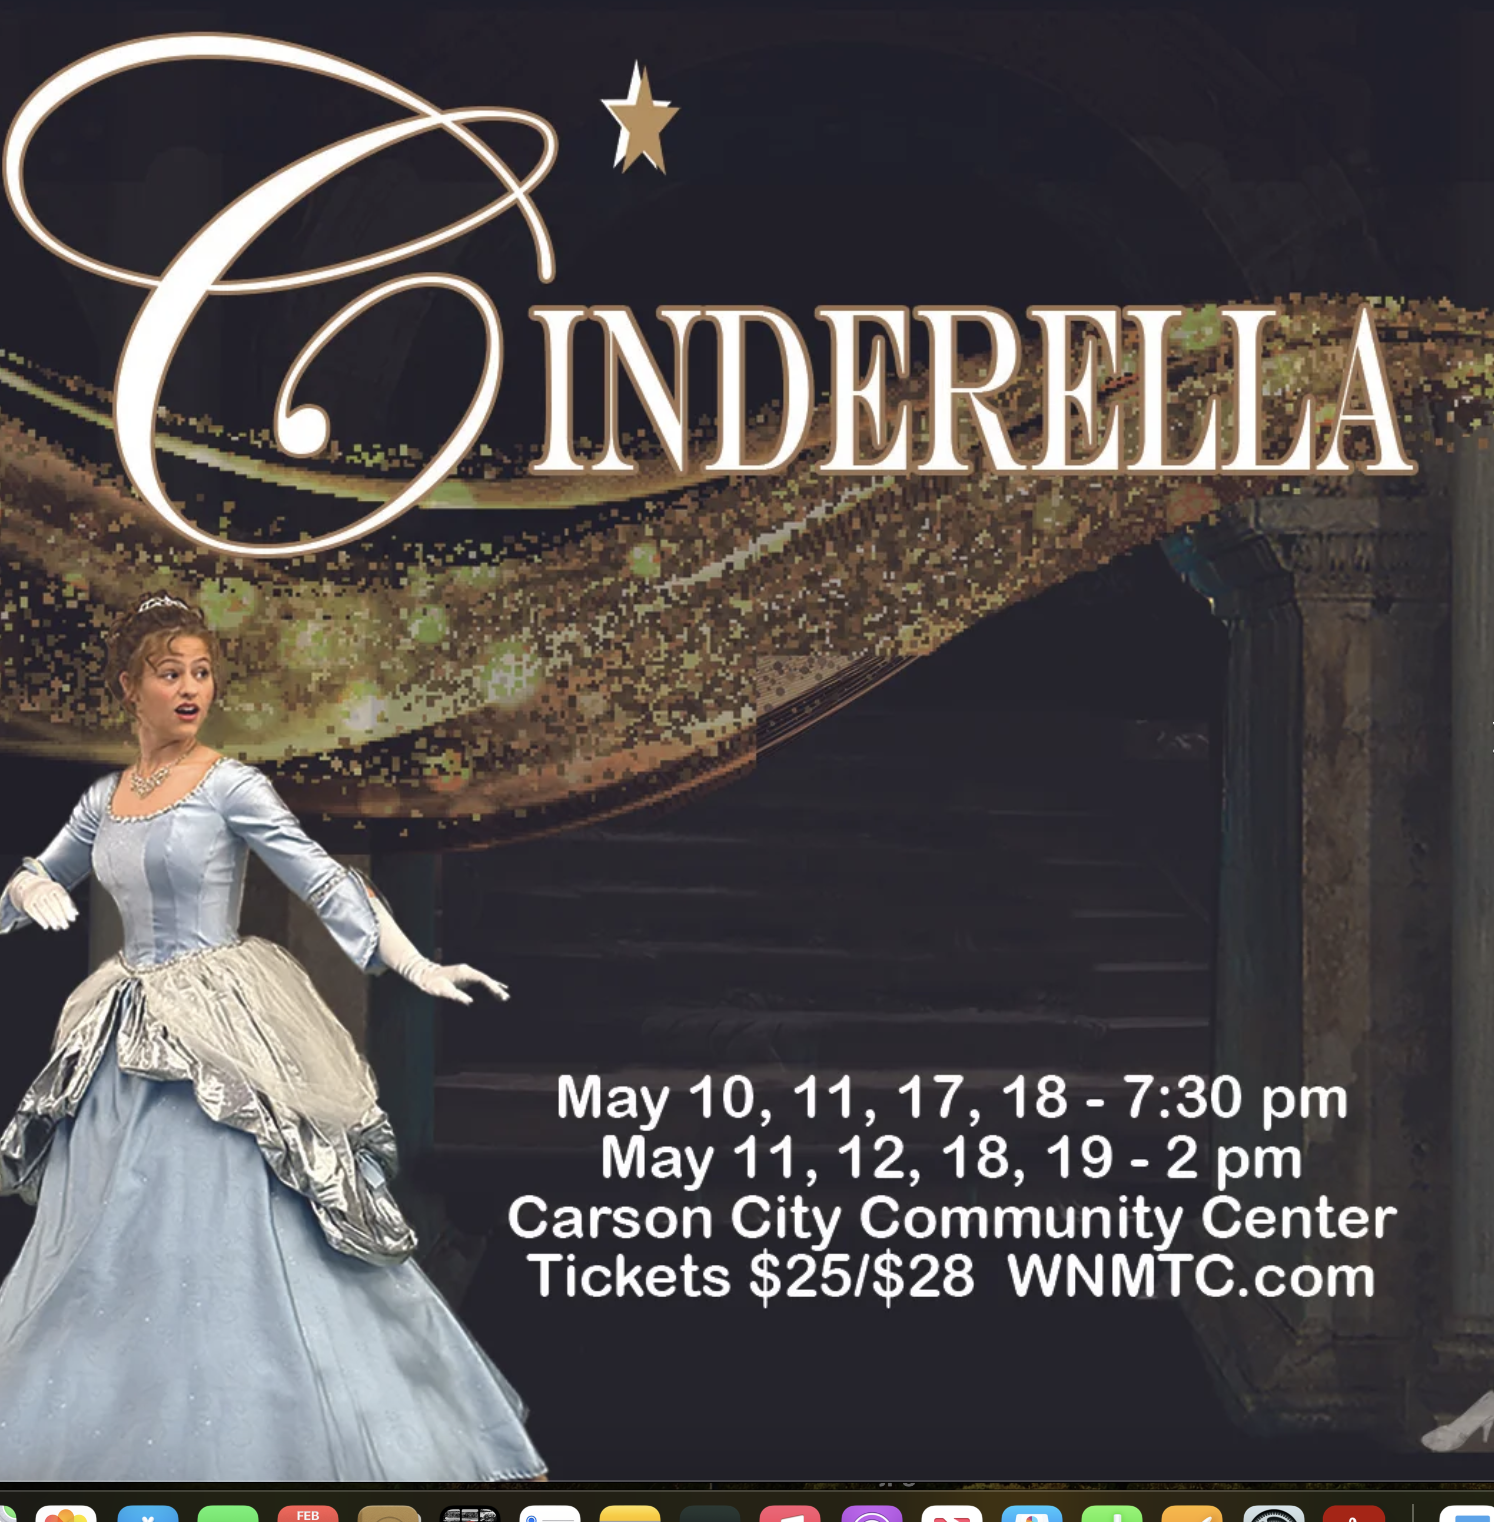 Tickets are on sale for WNMTC's production of Cinderella in May. Purchase them at wnmtc.com.